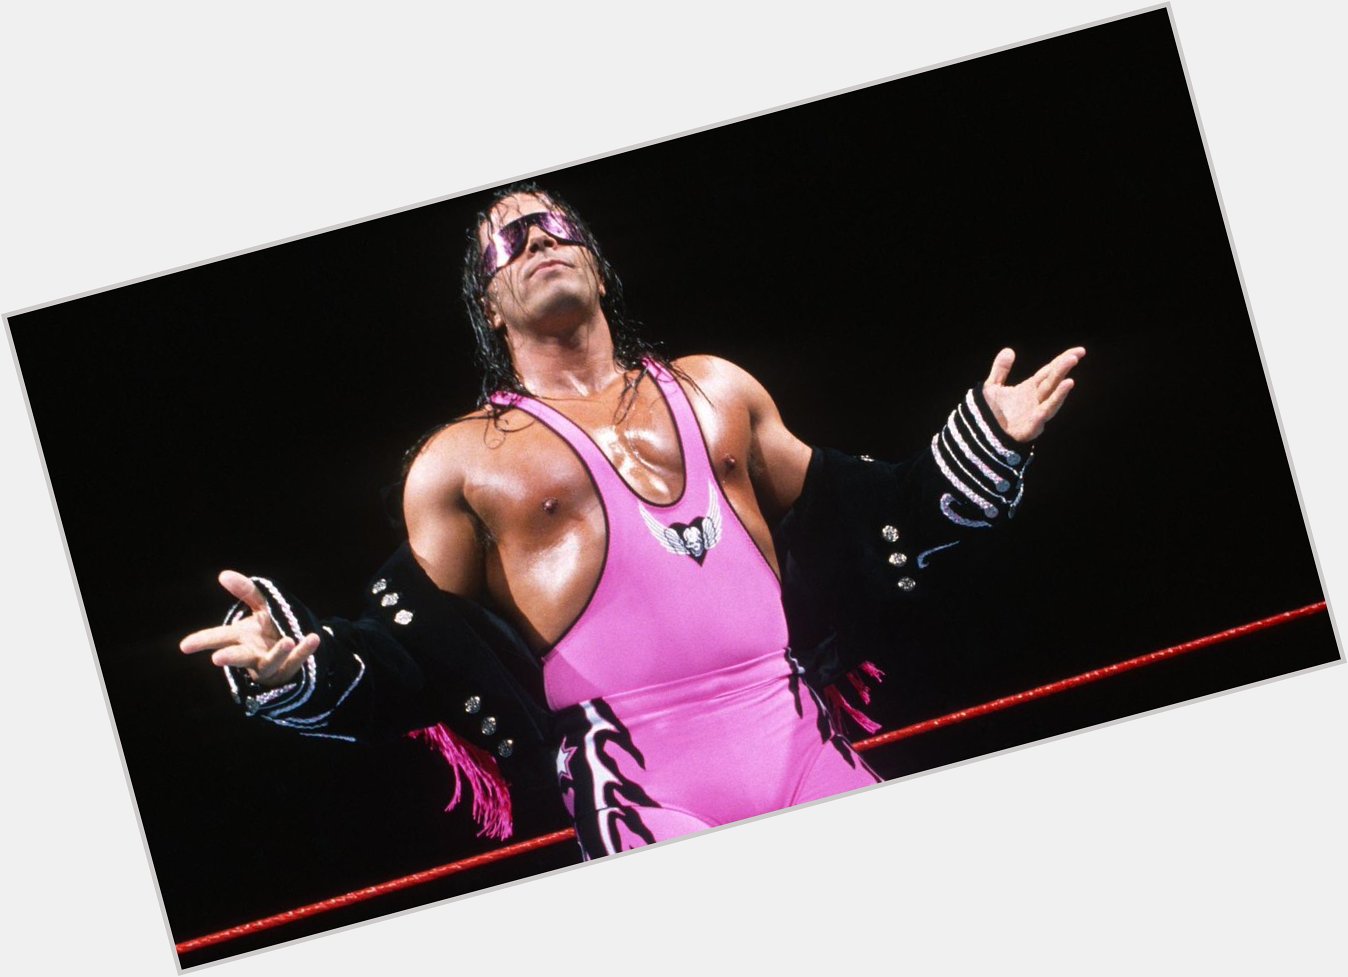 Happy birthday to the legendary bret hart 
One of the greatest of all time 